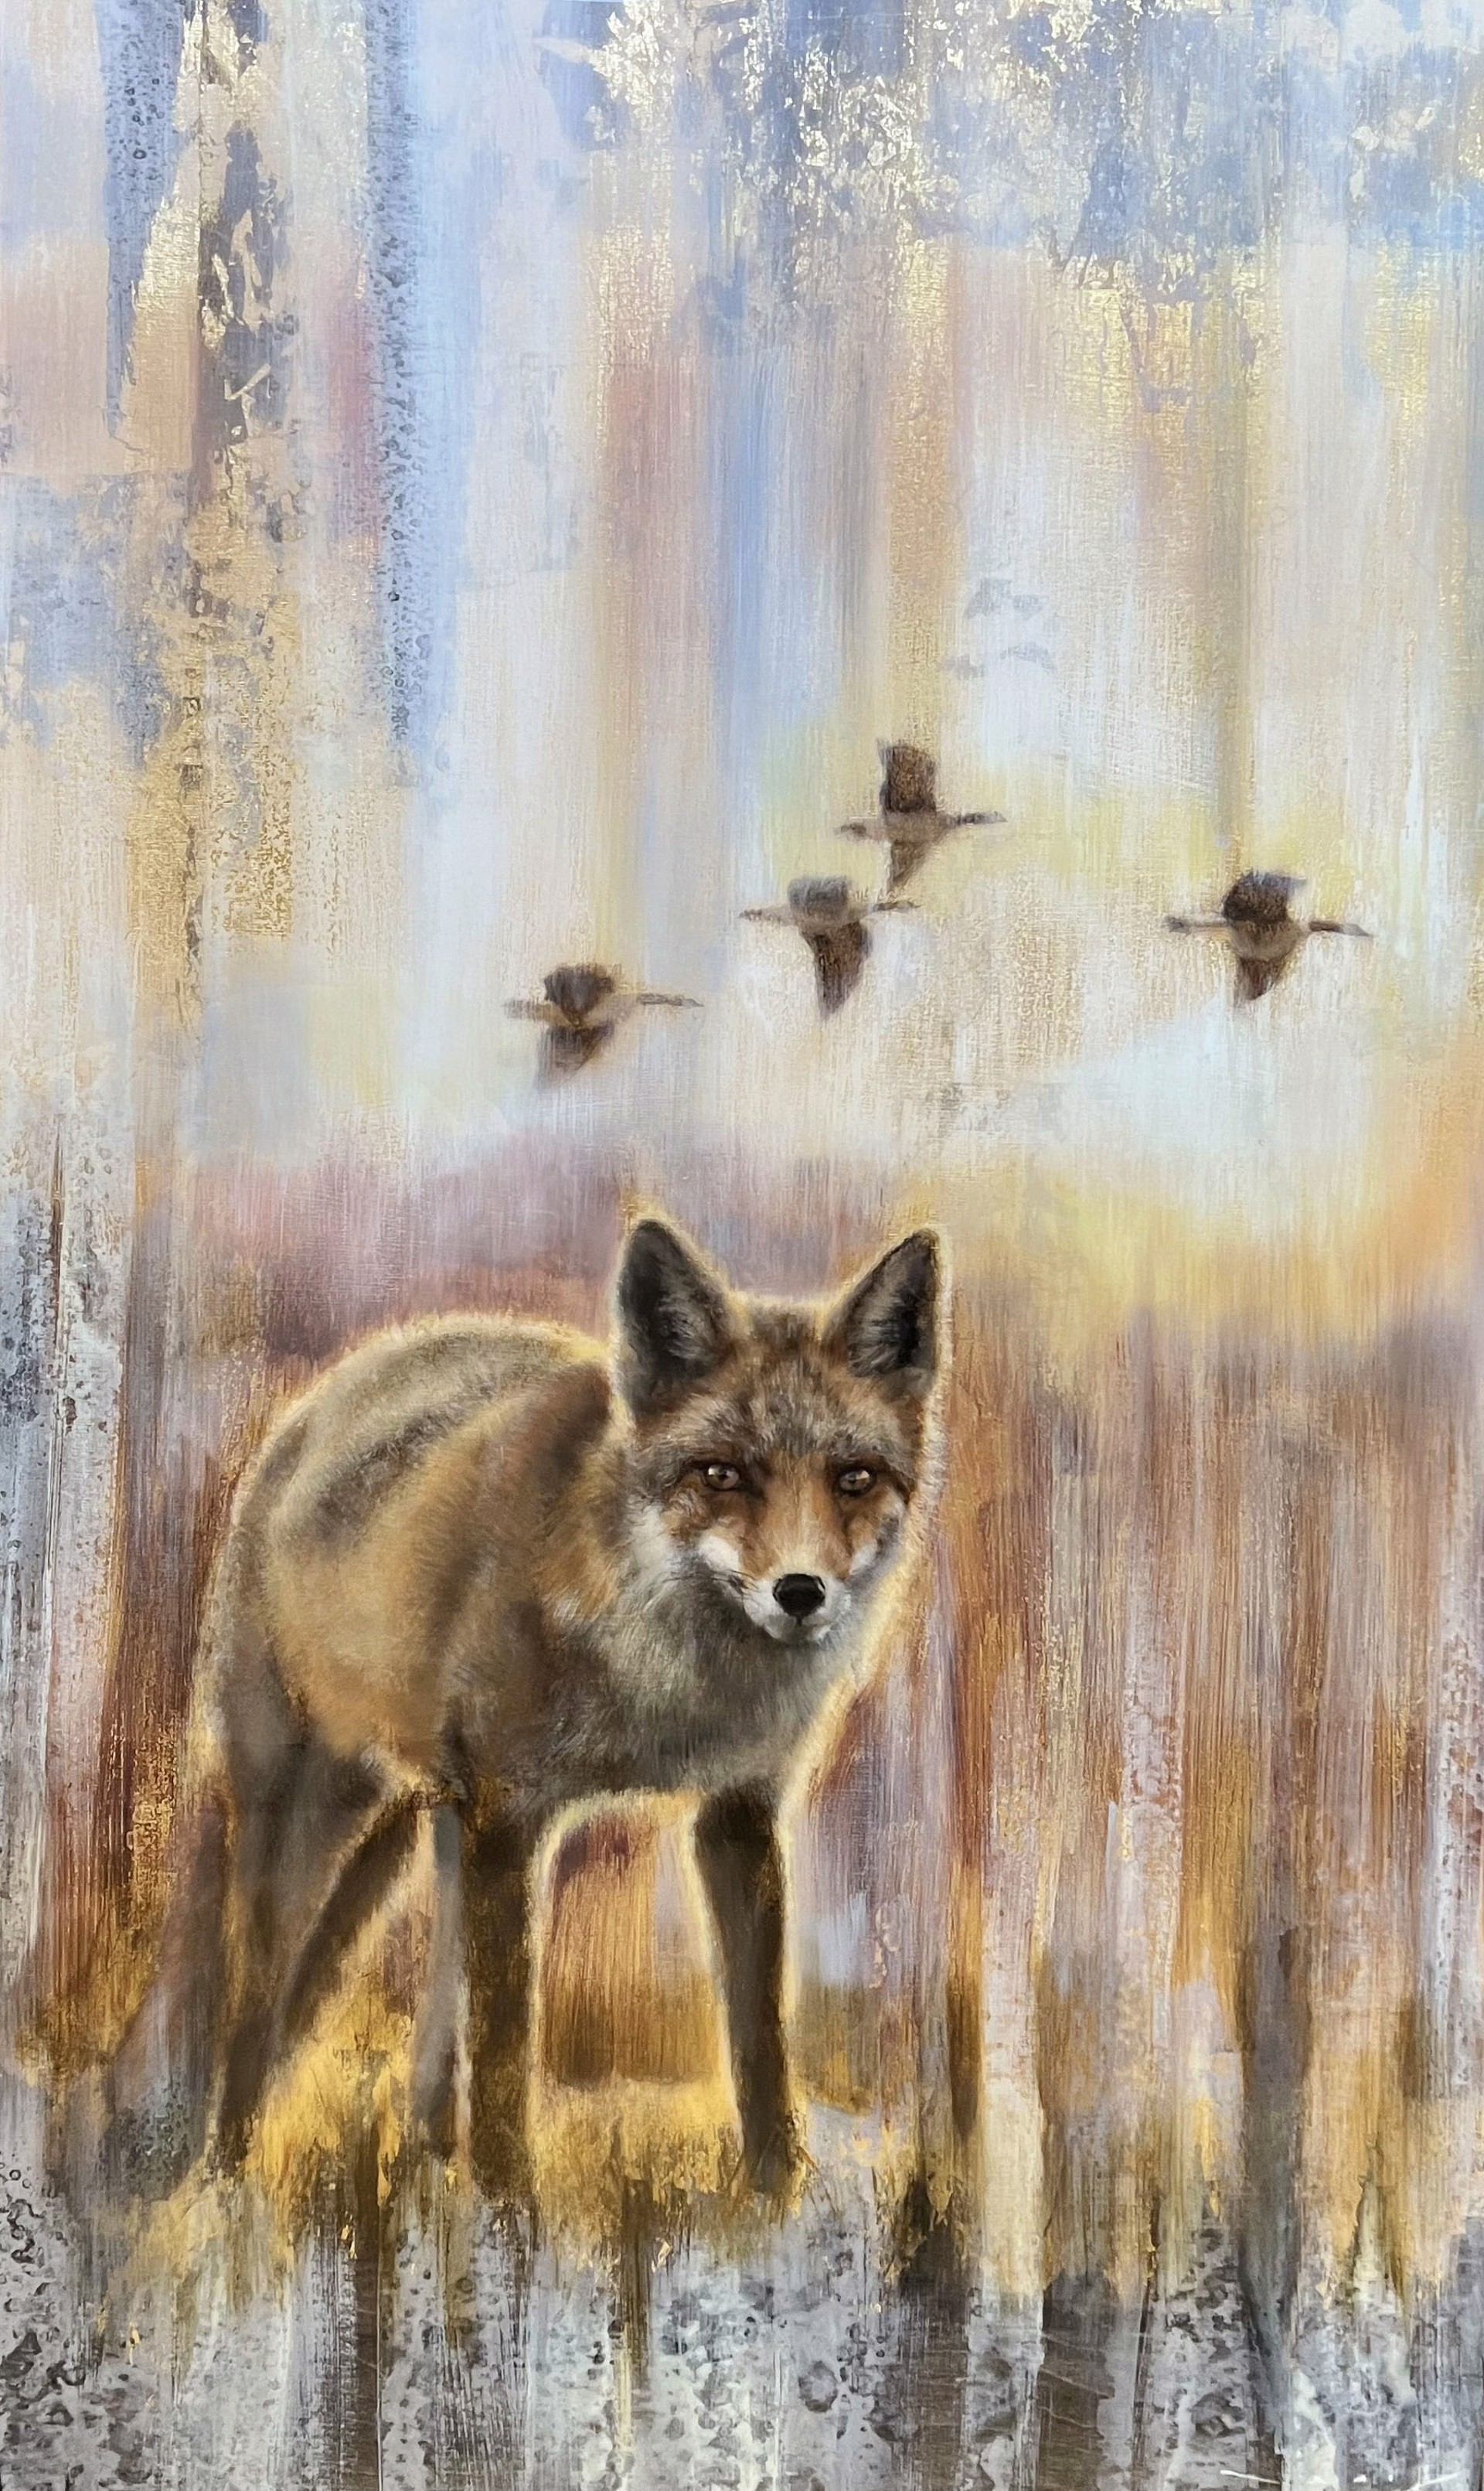 Red fox in field with geese flying by. 